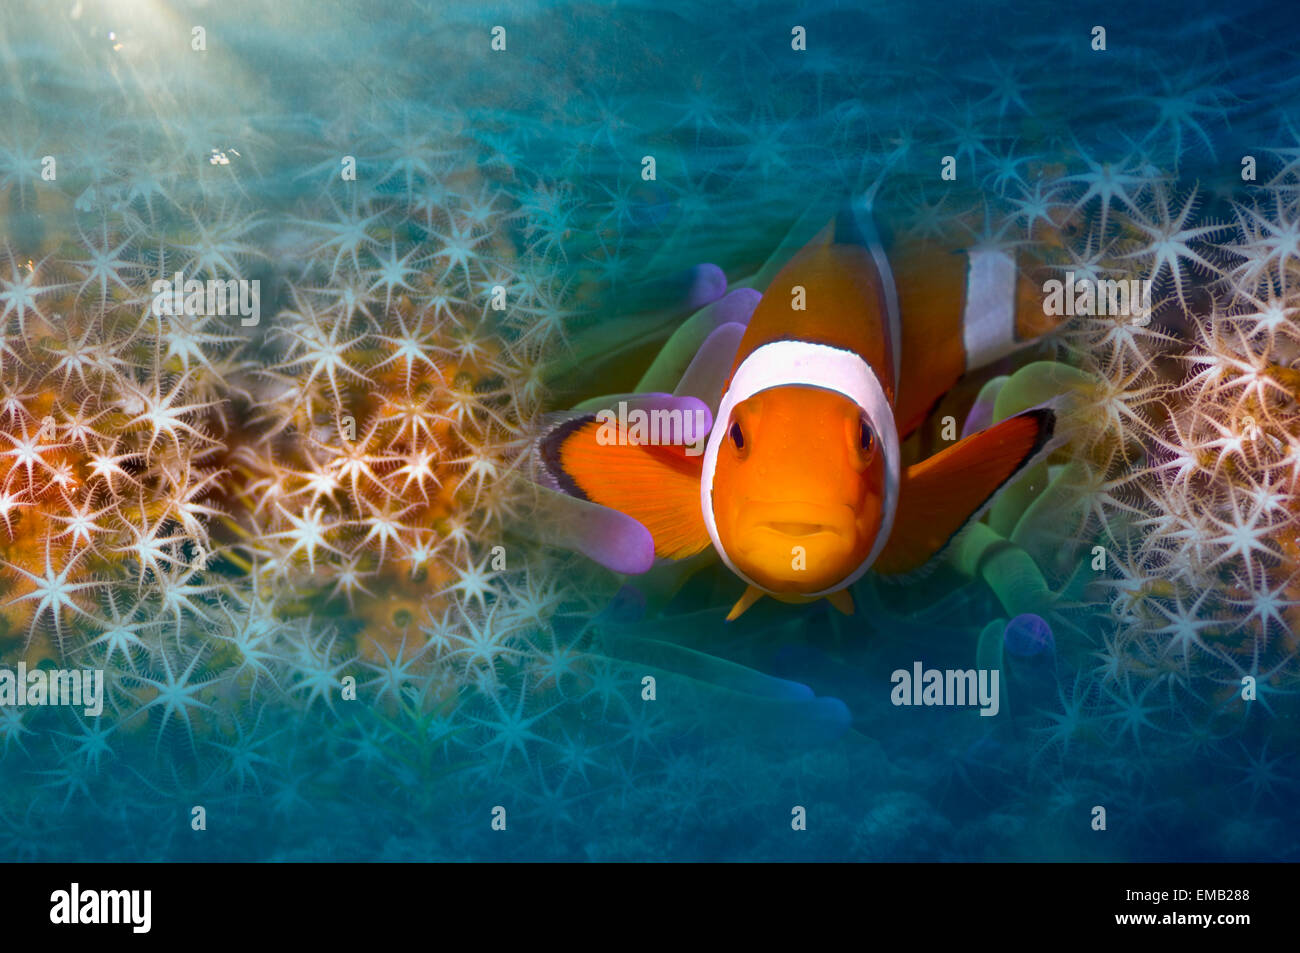 Clown anemonefish in montage Foto Stock